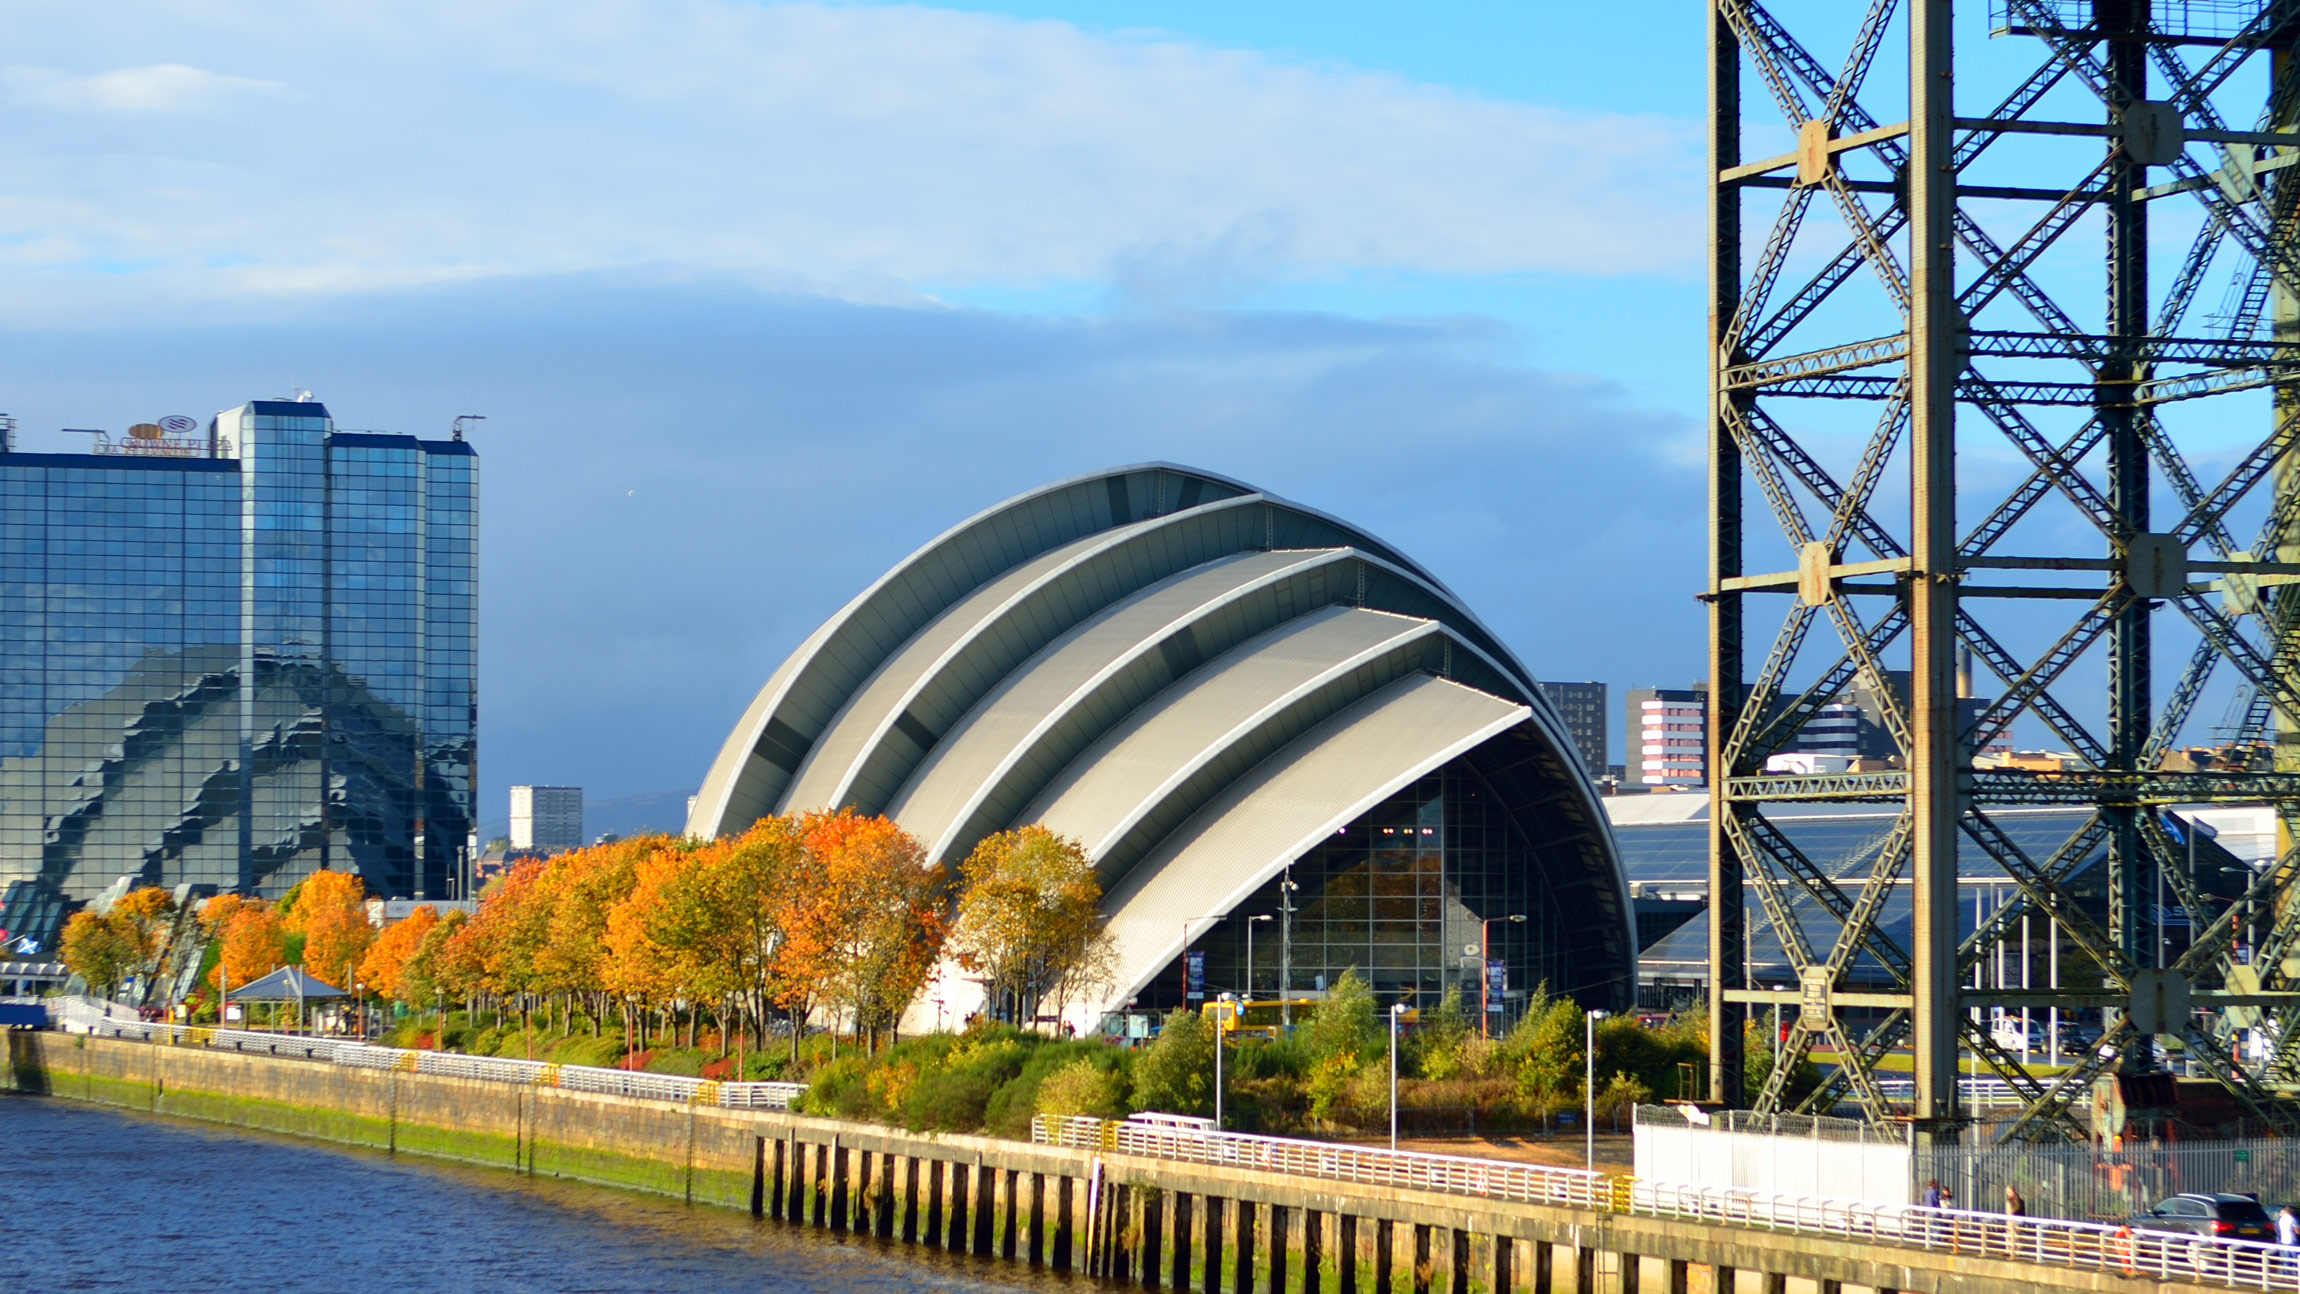 The Glasgow Declaration on Climate Action in Tourism